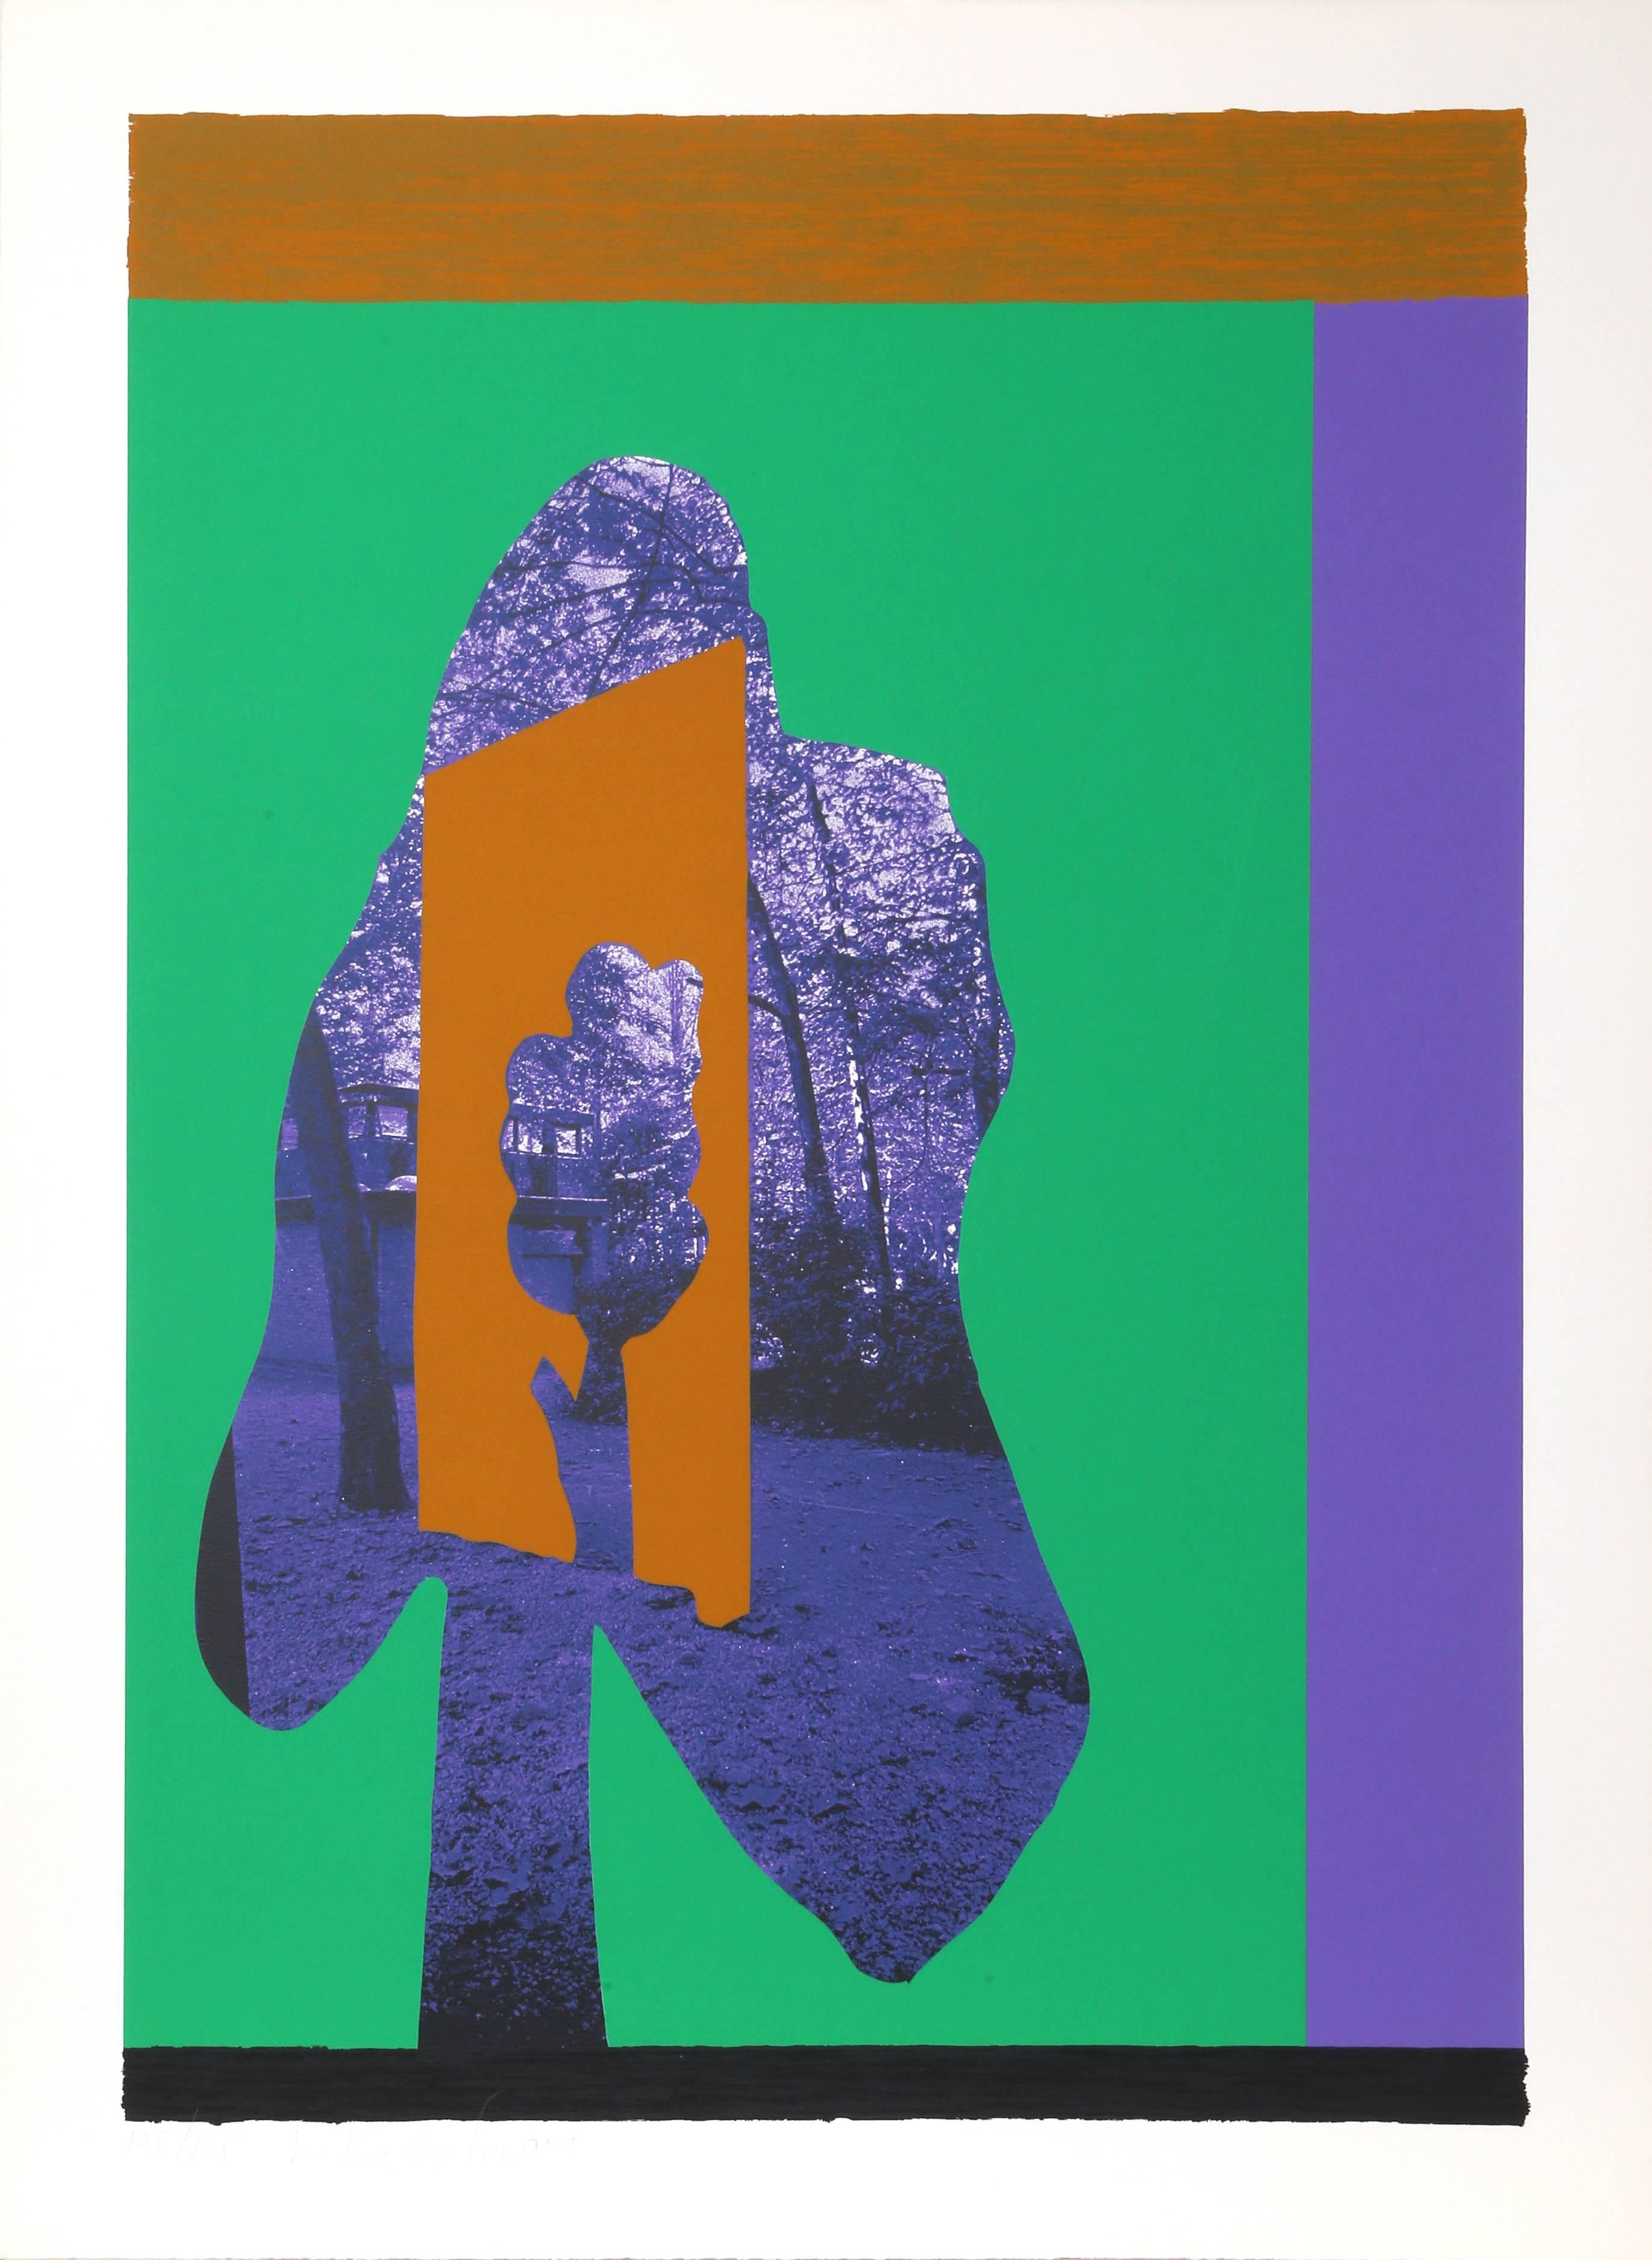 Artist:  Menashe Kadishman, Israeli (1932 - 2015)
Title:   Tree in Tree
Year:  1979
Medium:  Serigraph, signed and numbered in pencil
Edition:  125
Size:  41  x 30 in. (104.14  x 76.2 cm)